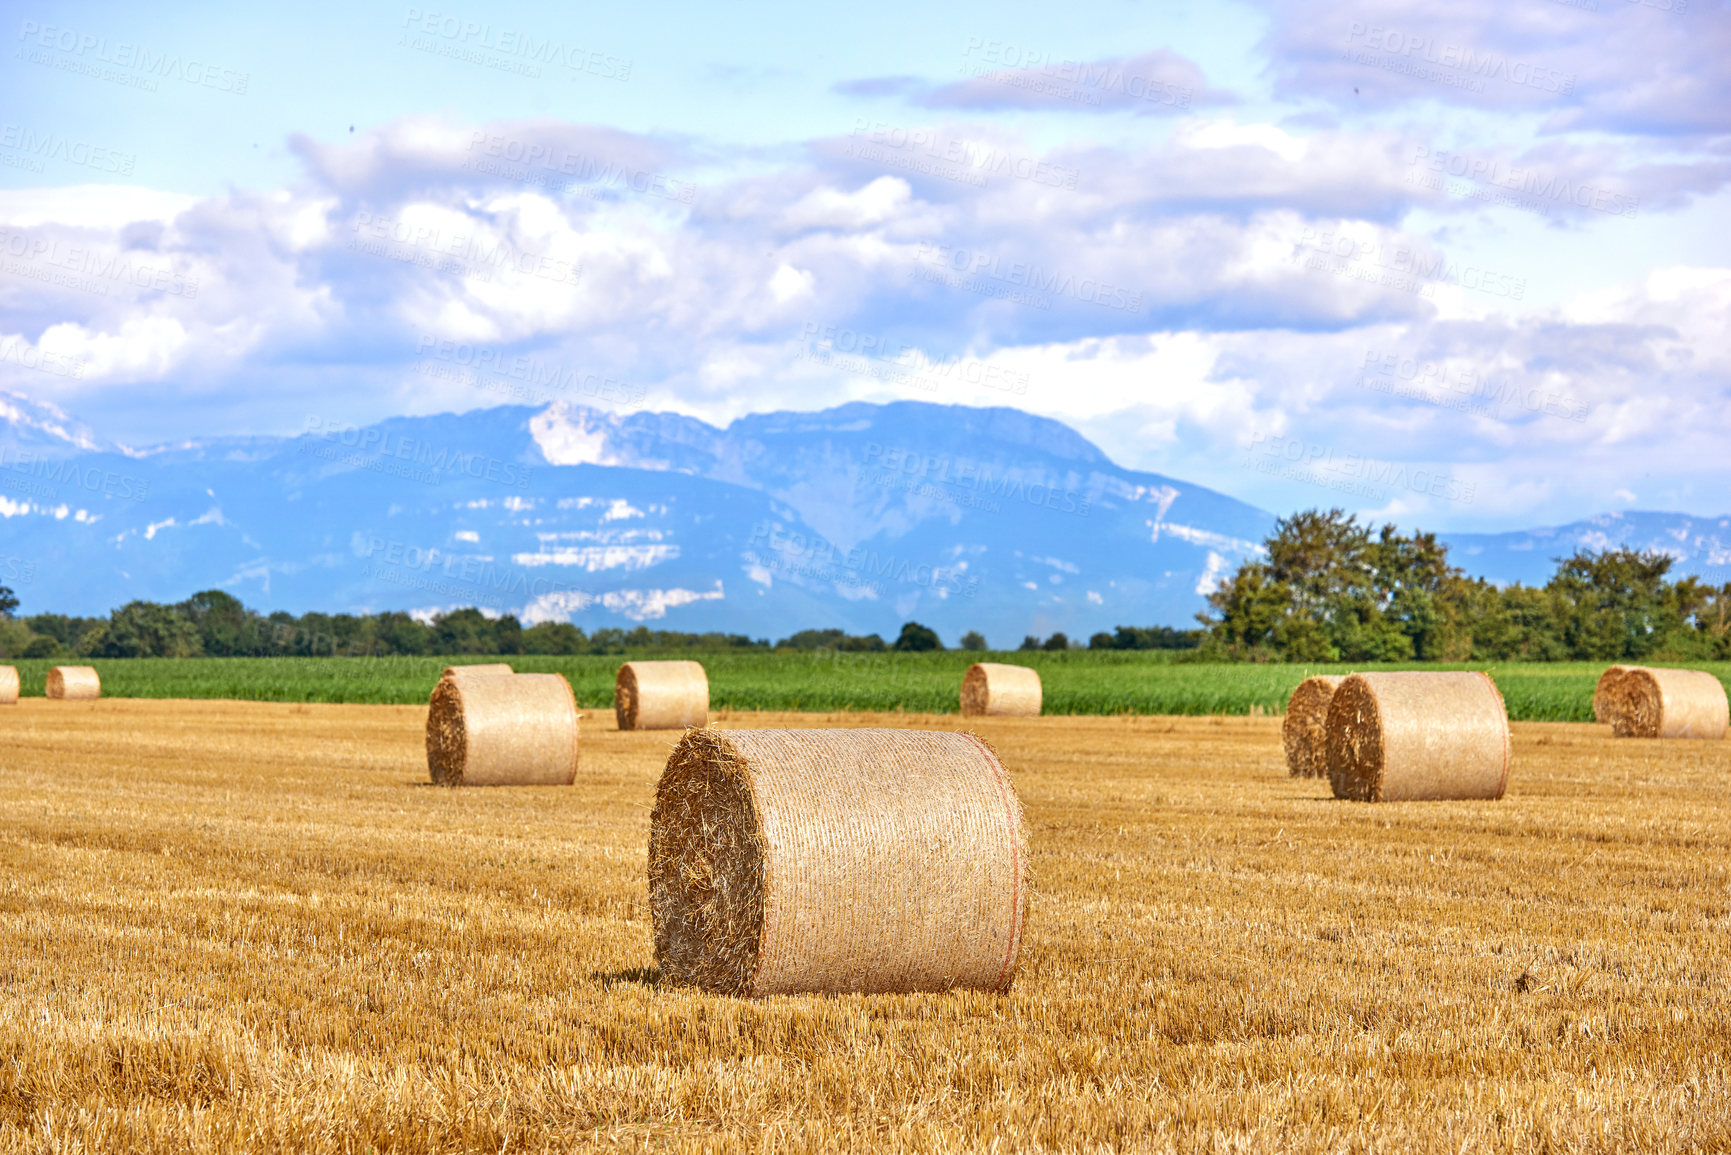 Buy stock photo Beautiful wheat, hay and straw farm field in summer on the countryside, farmland with a mountain, trees and cloudy blue sky background. Landscape of round haystacks after farming with copy space